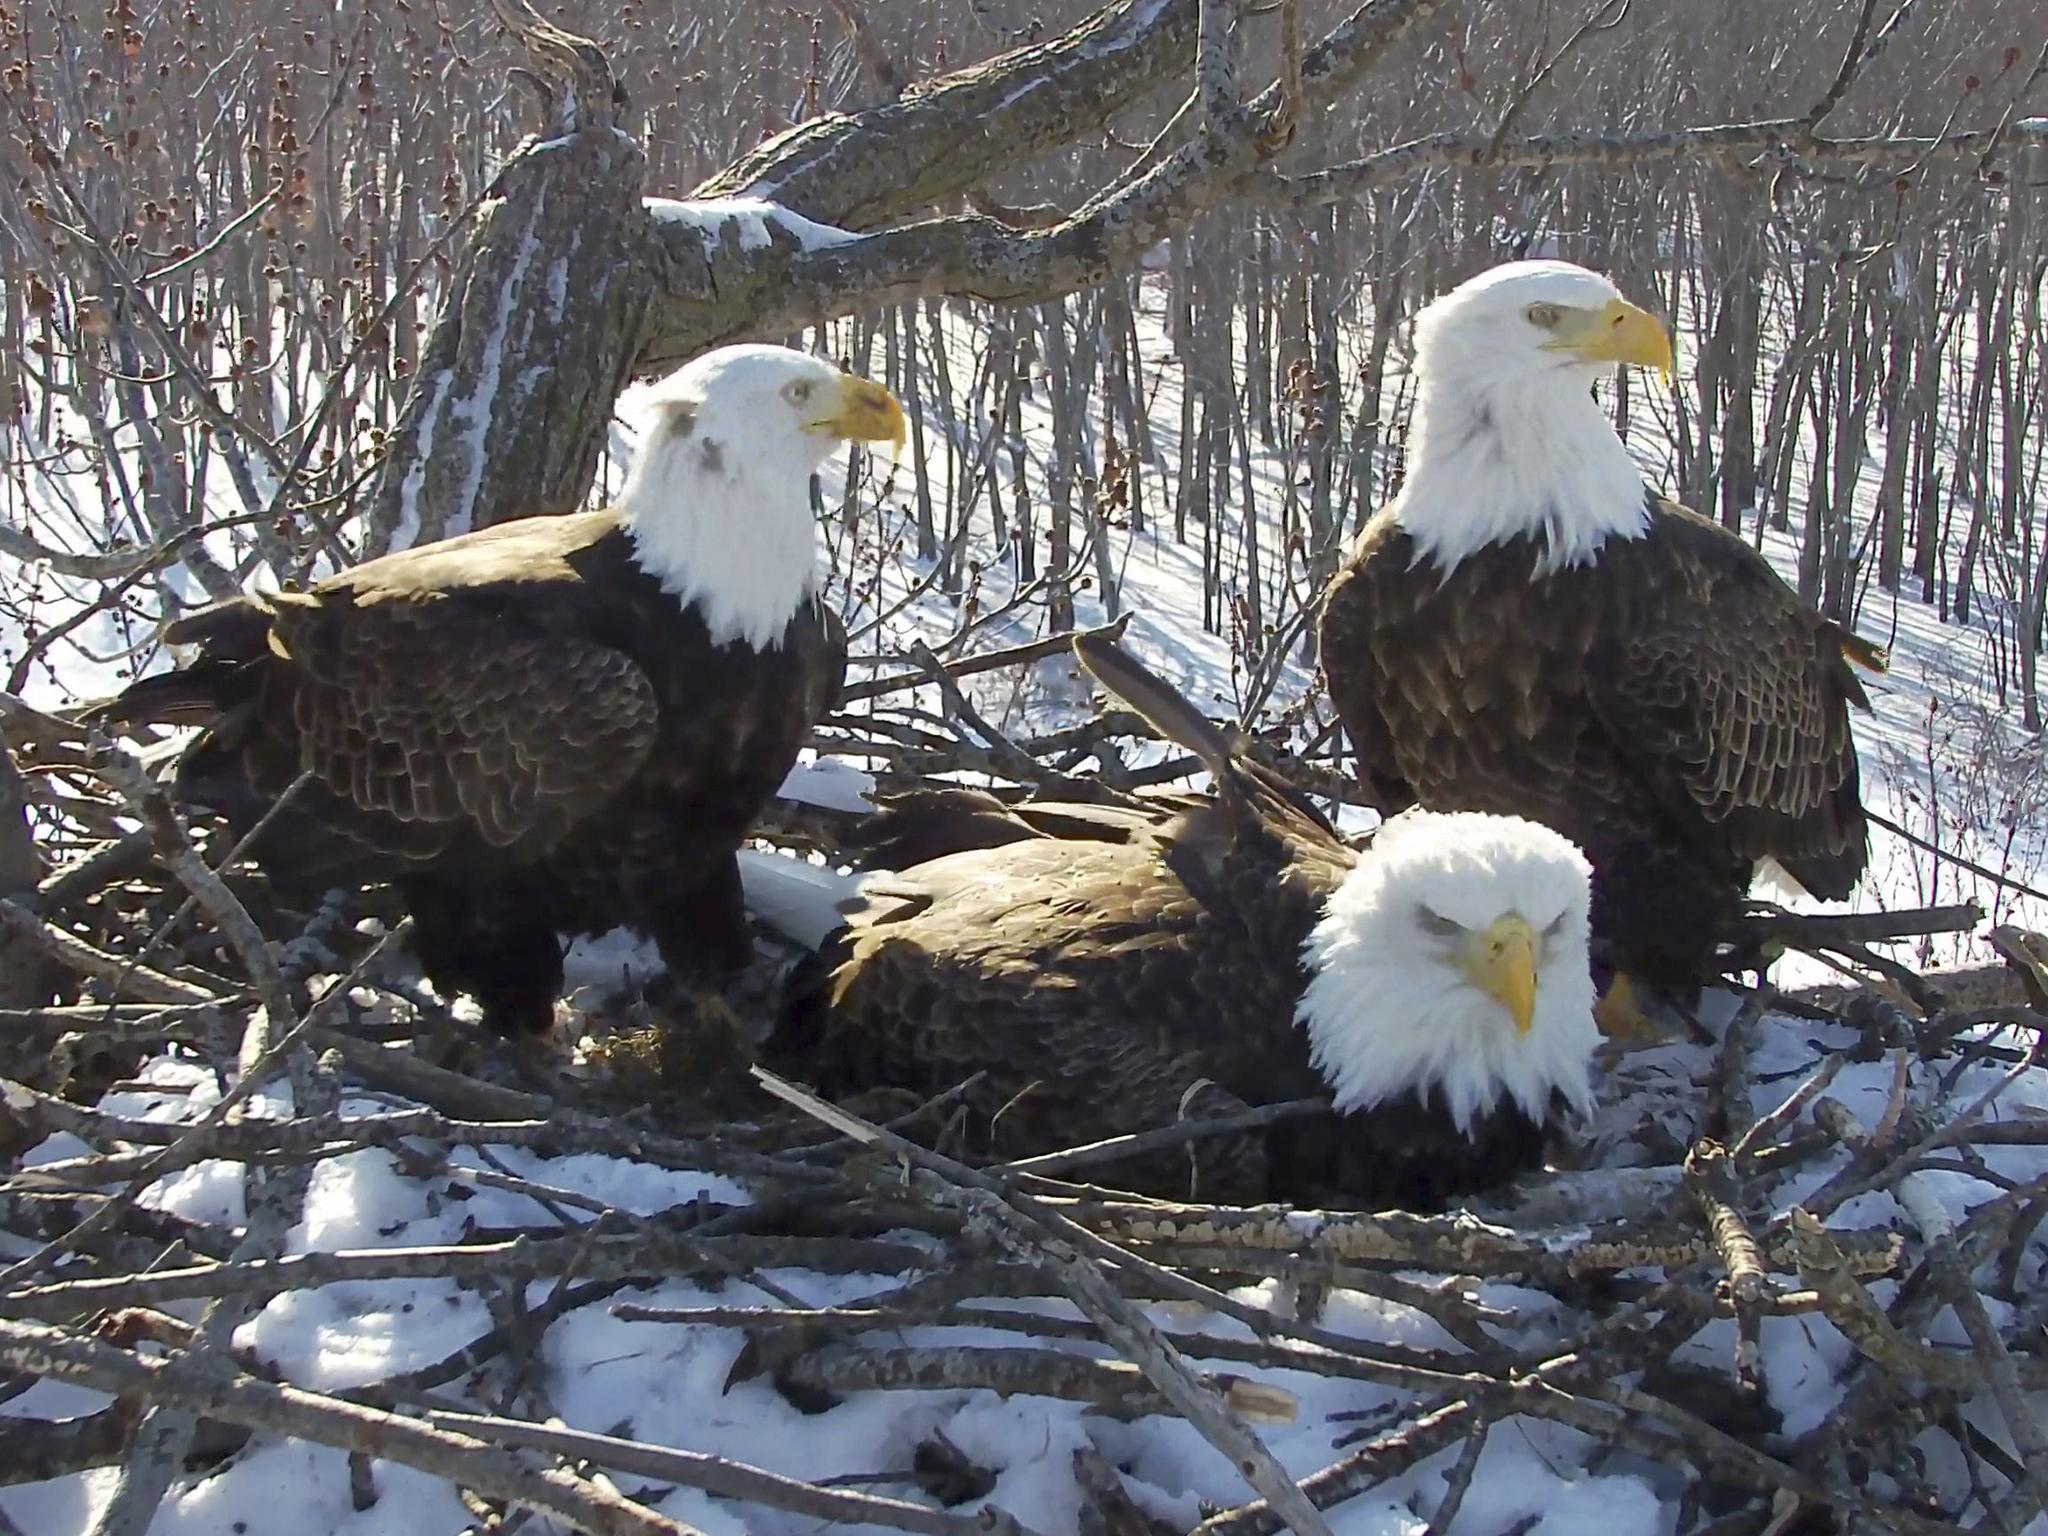 The Endangered Species Act is credited with protecting bald eagles from extinction in North America.